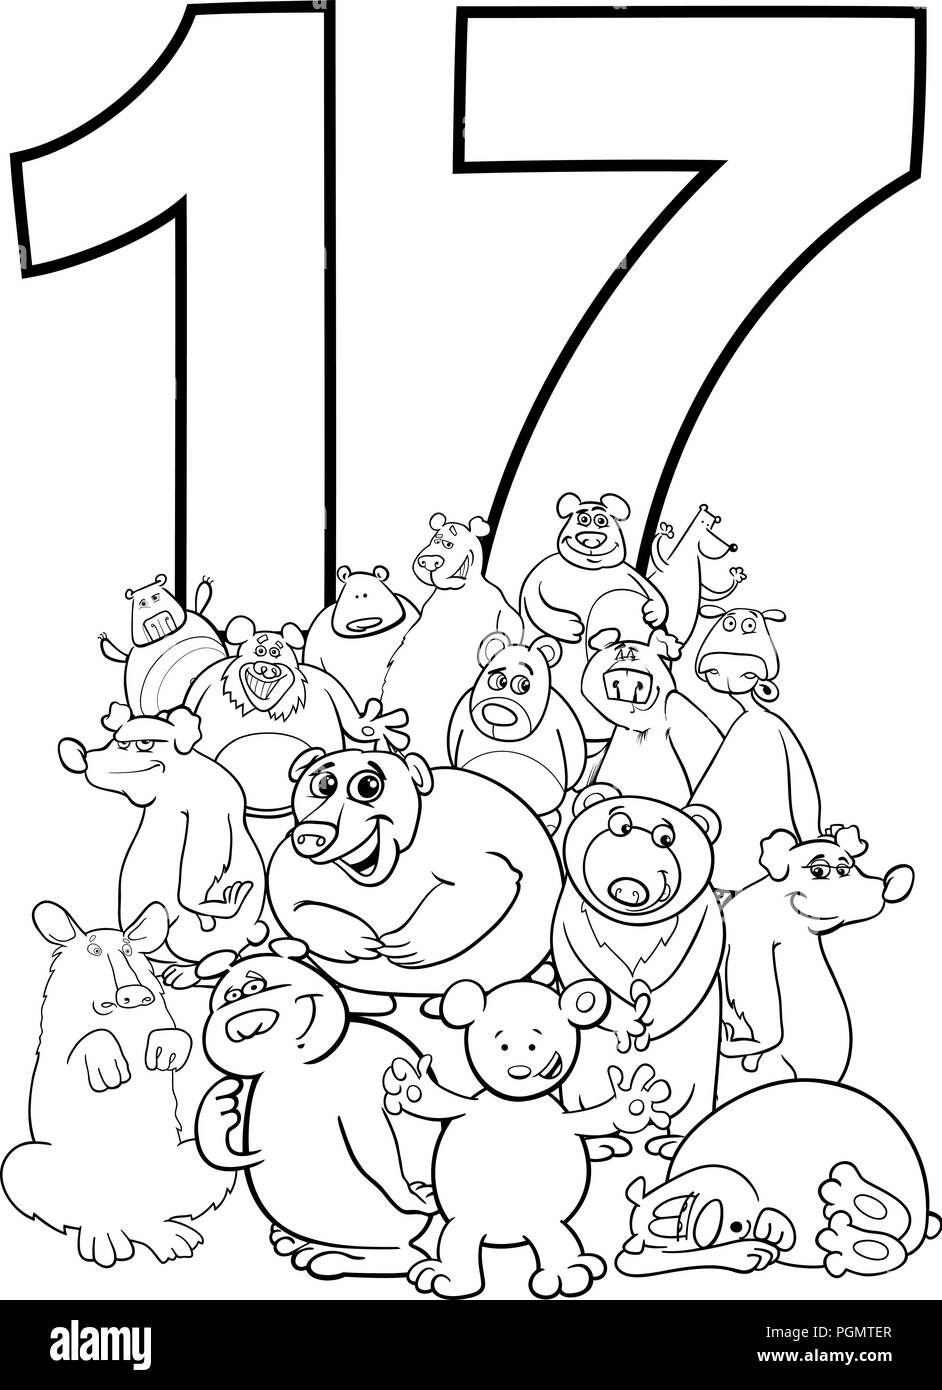 Black and White Cartoon Illustration of Number Seventeen and Bear Characters Group Coloring Book Stock Vector